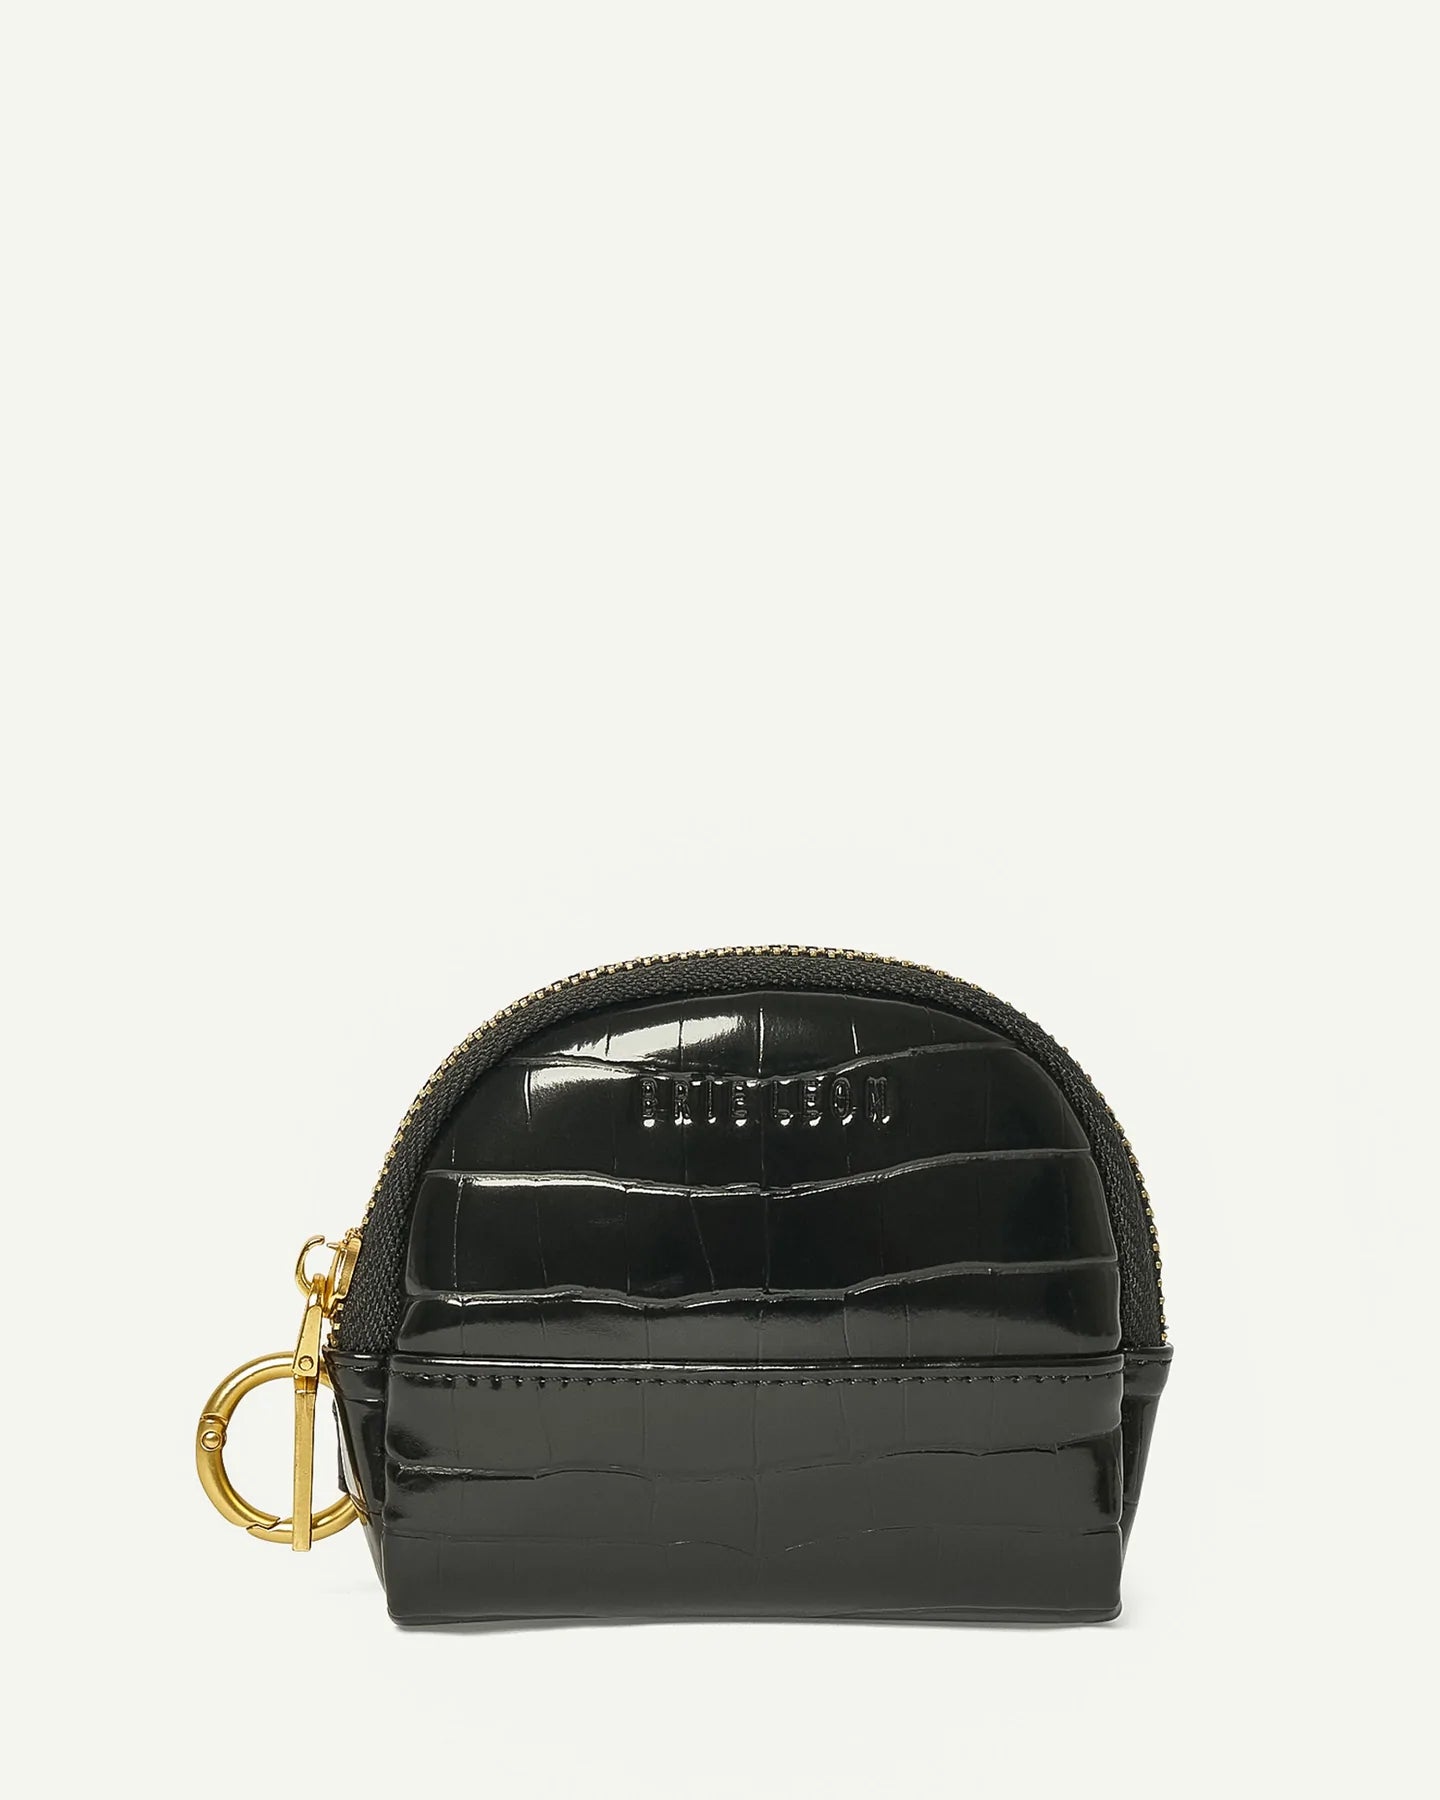 BRIE LEON // Circulo Coin Purse BLACK BRUSHED RECYCLED CROC